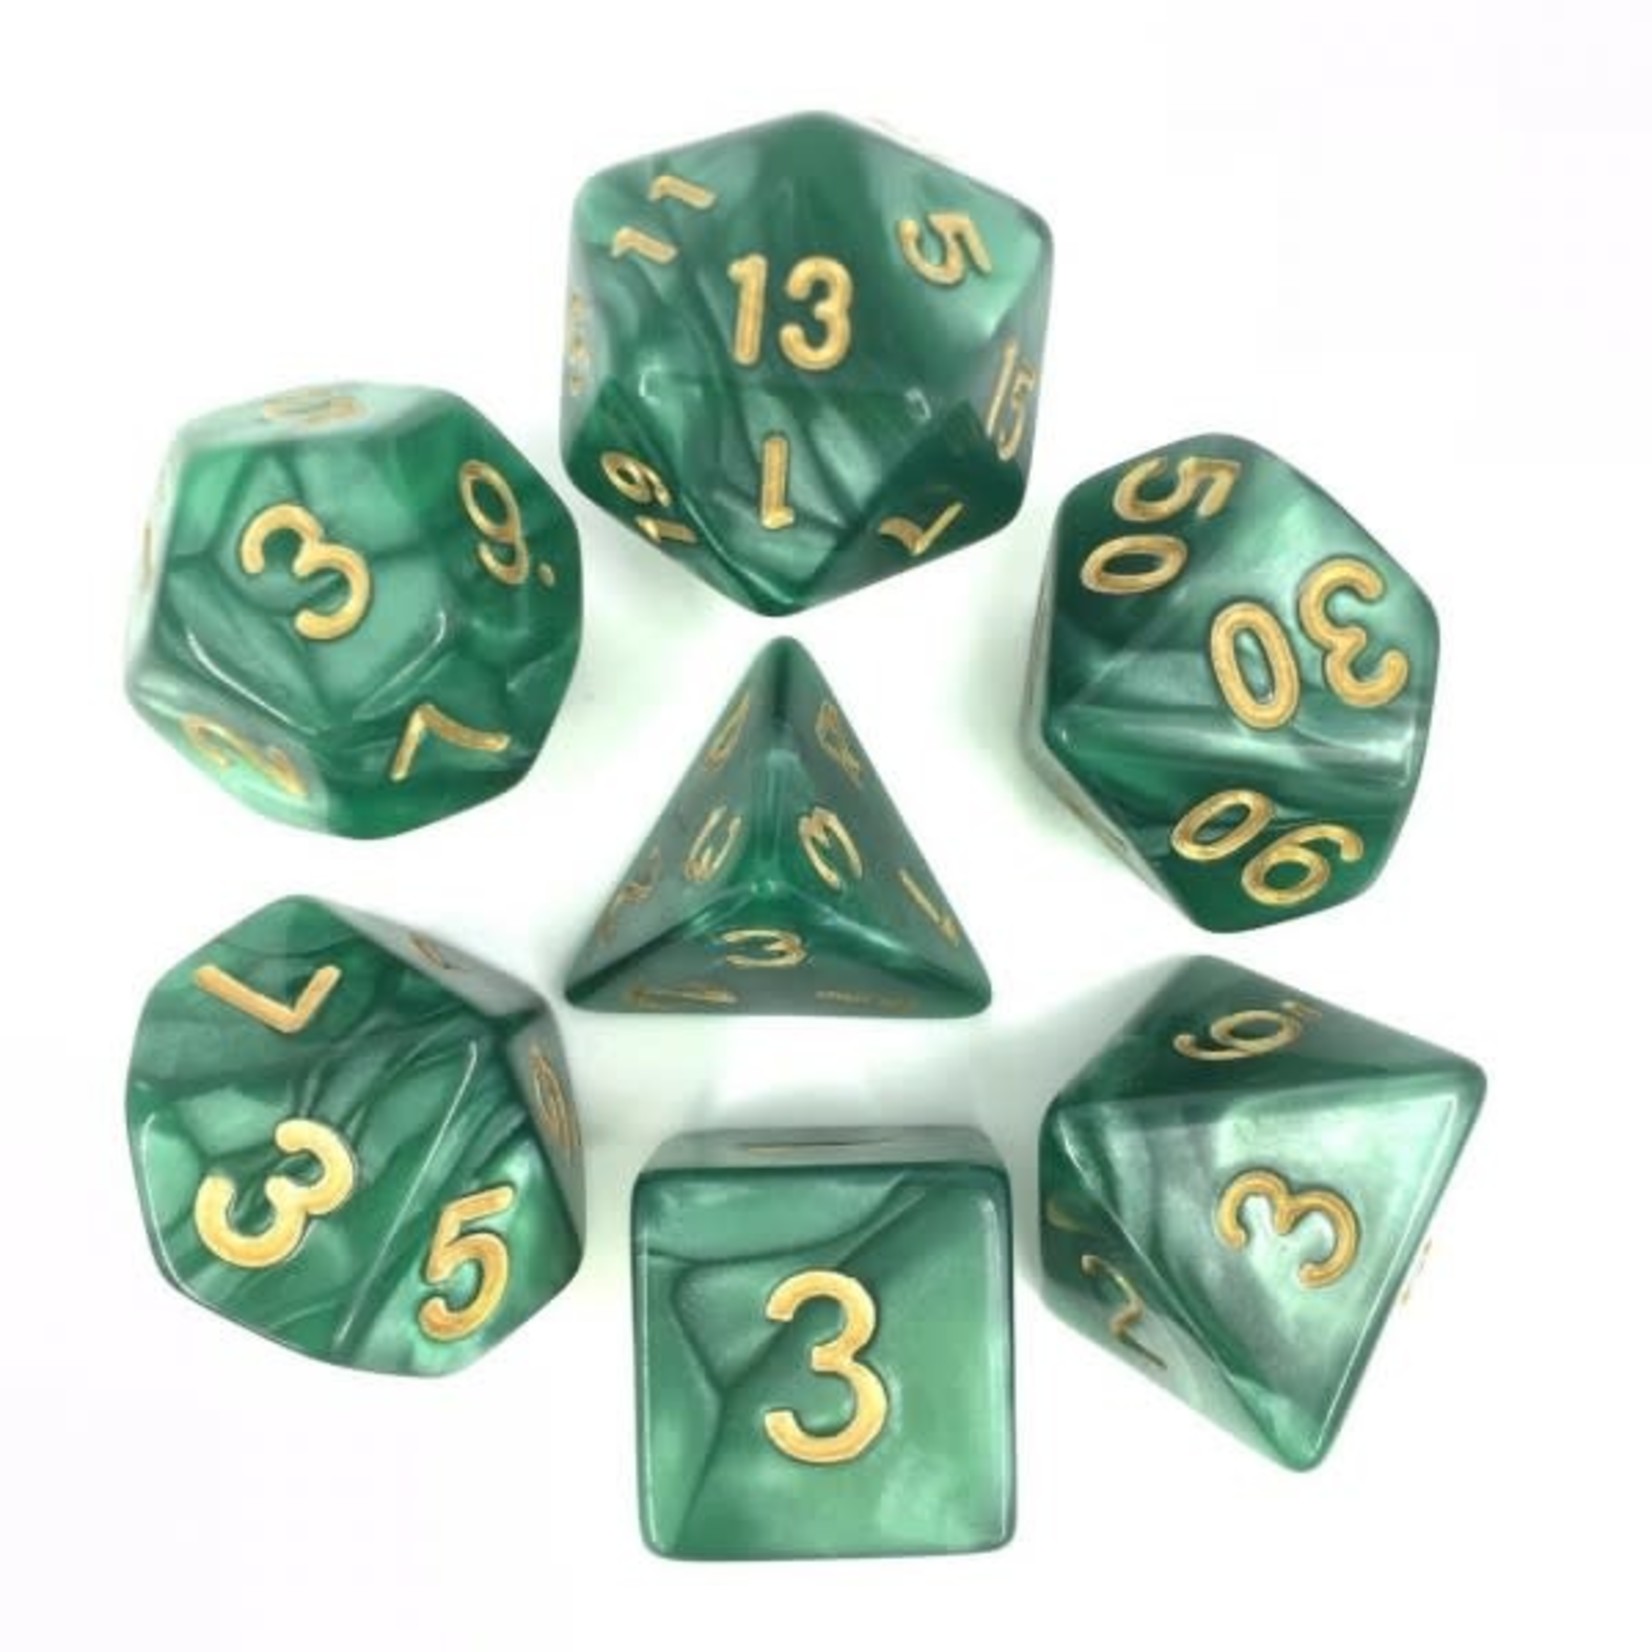 7 Set Polyhedral Dice - Green Pearl Gold Font